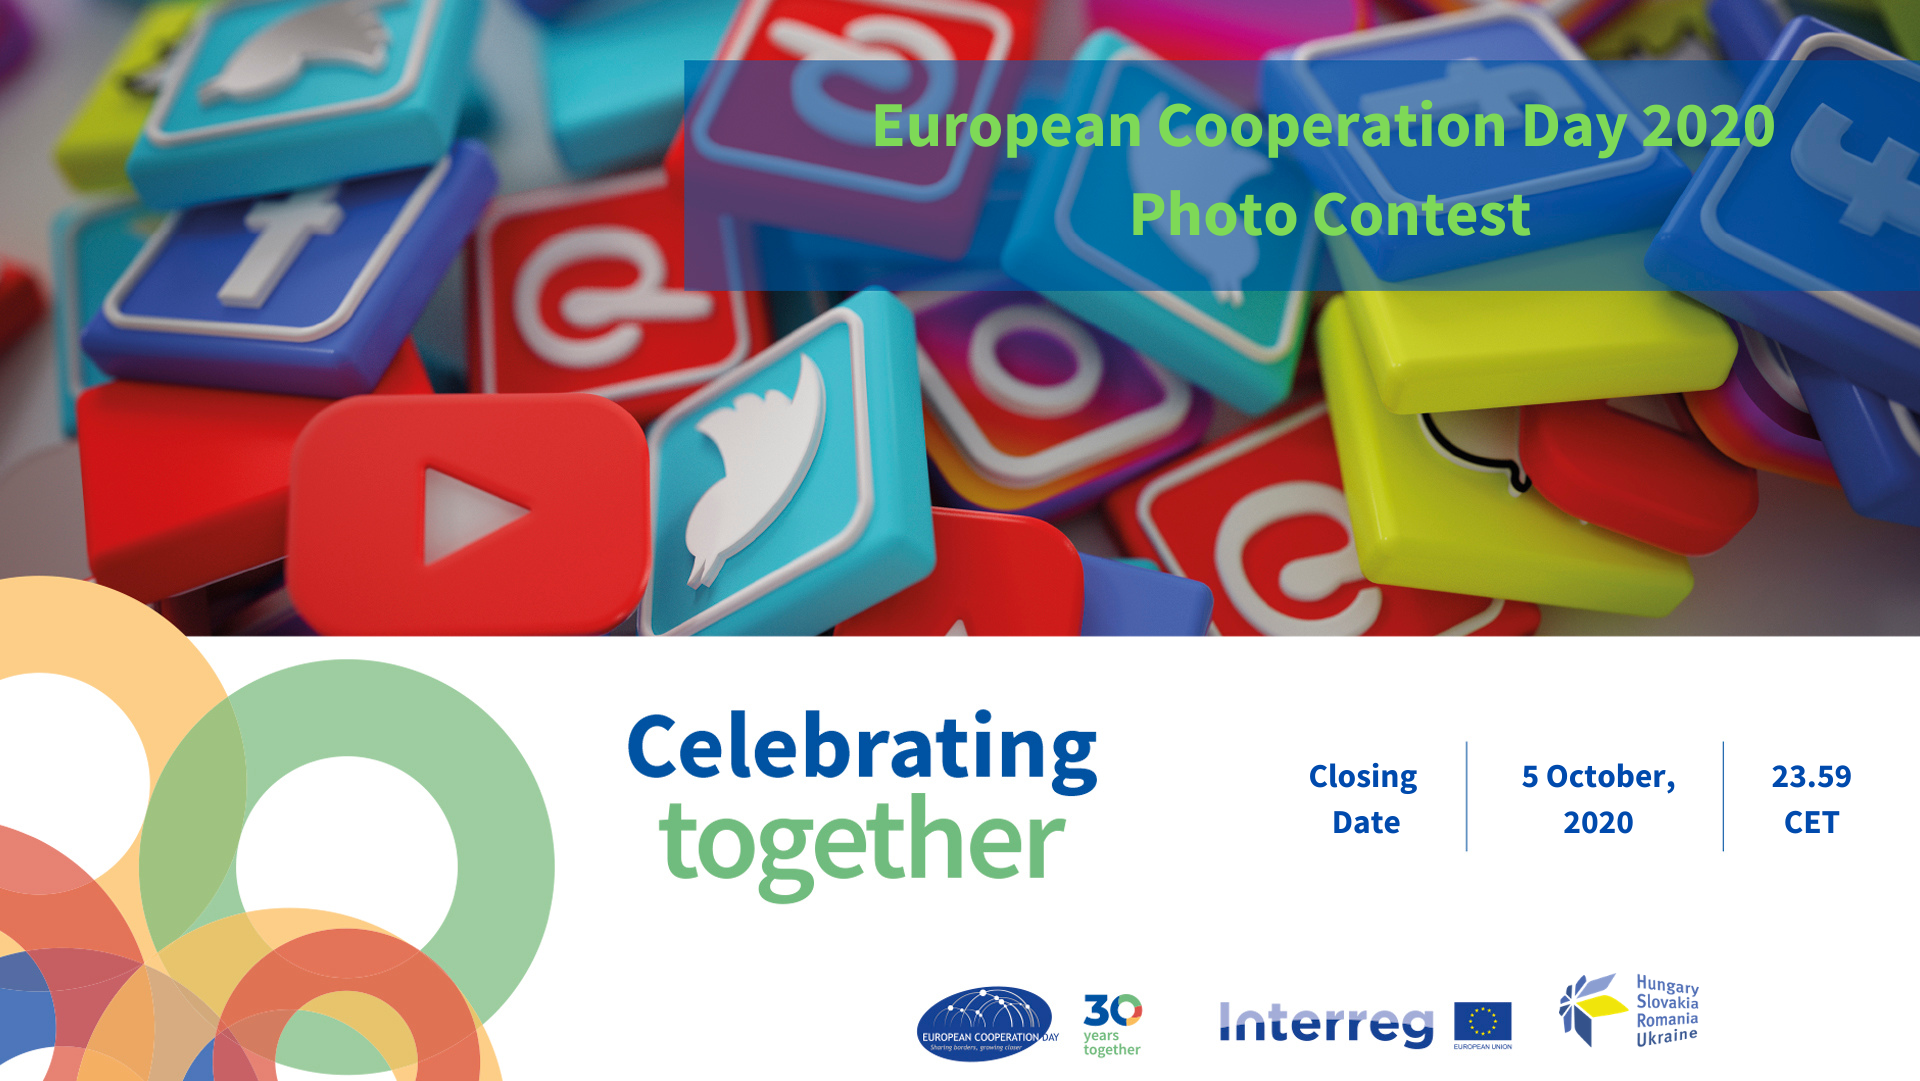 Photo Contest dedicated to the European Cooperation Day 2020 